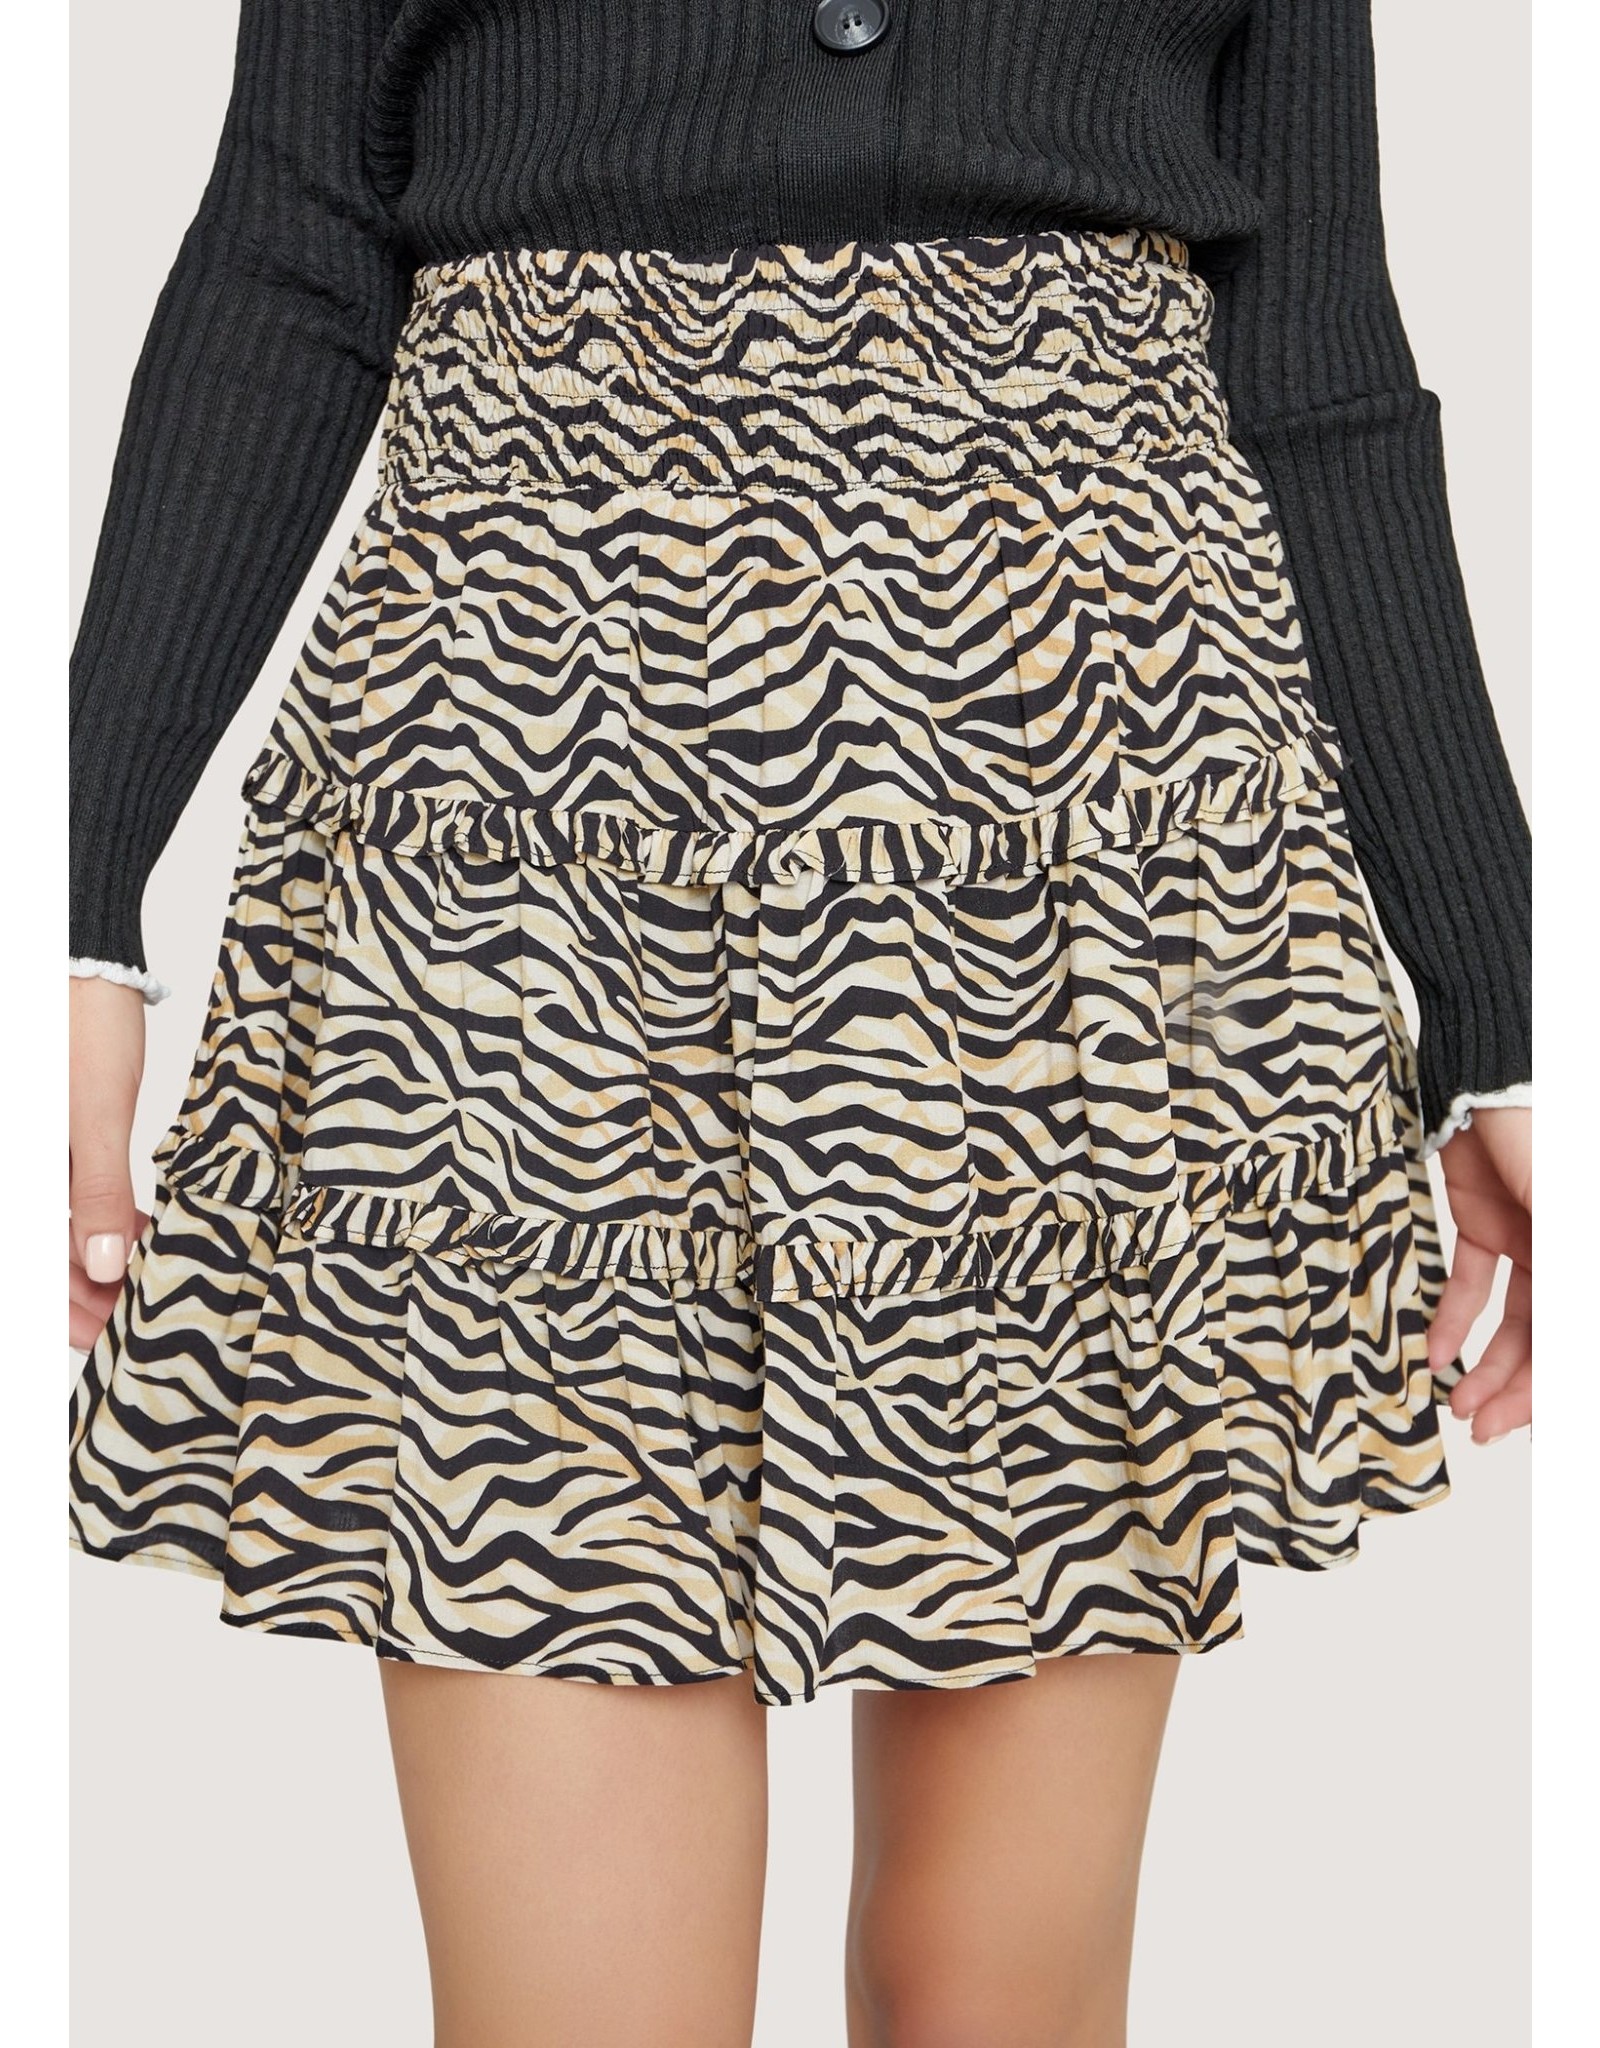 Lost + Wander Can't Be Tamed Mini Skirt